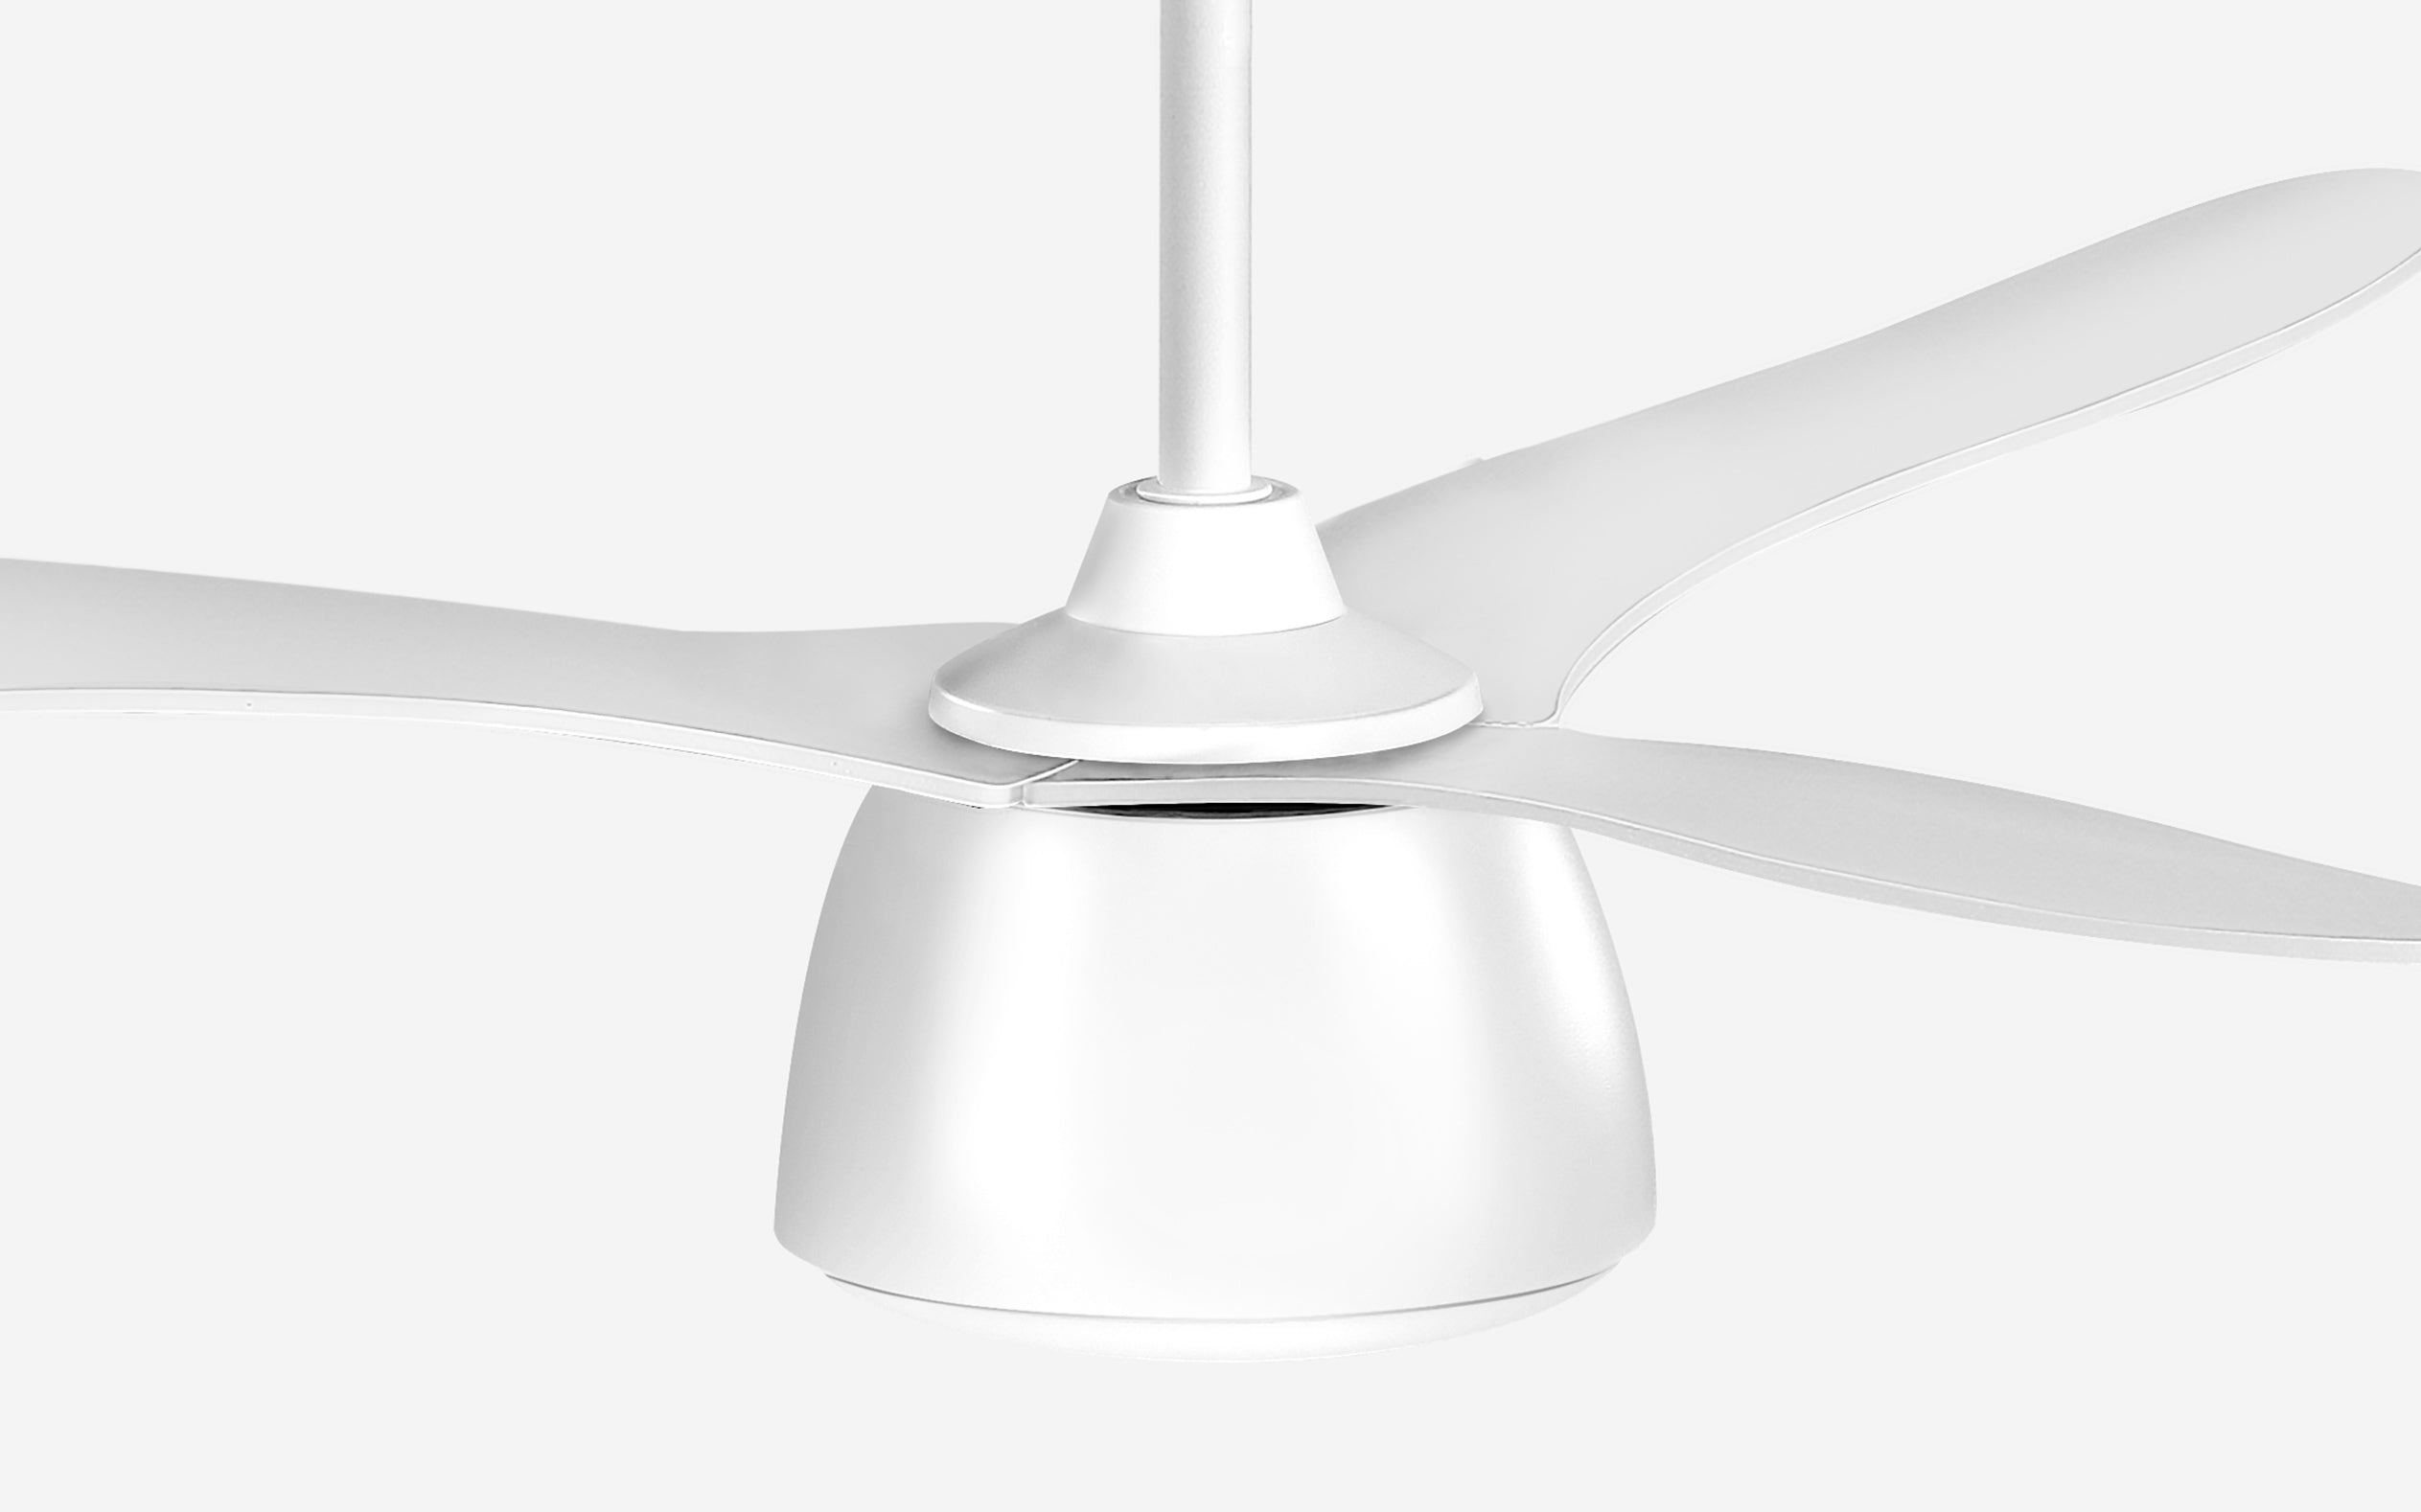 Pabbel Storm Ceiling Fan - #Body Color_White|Blade Color_White|Blade Size_48"